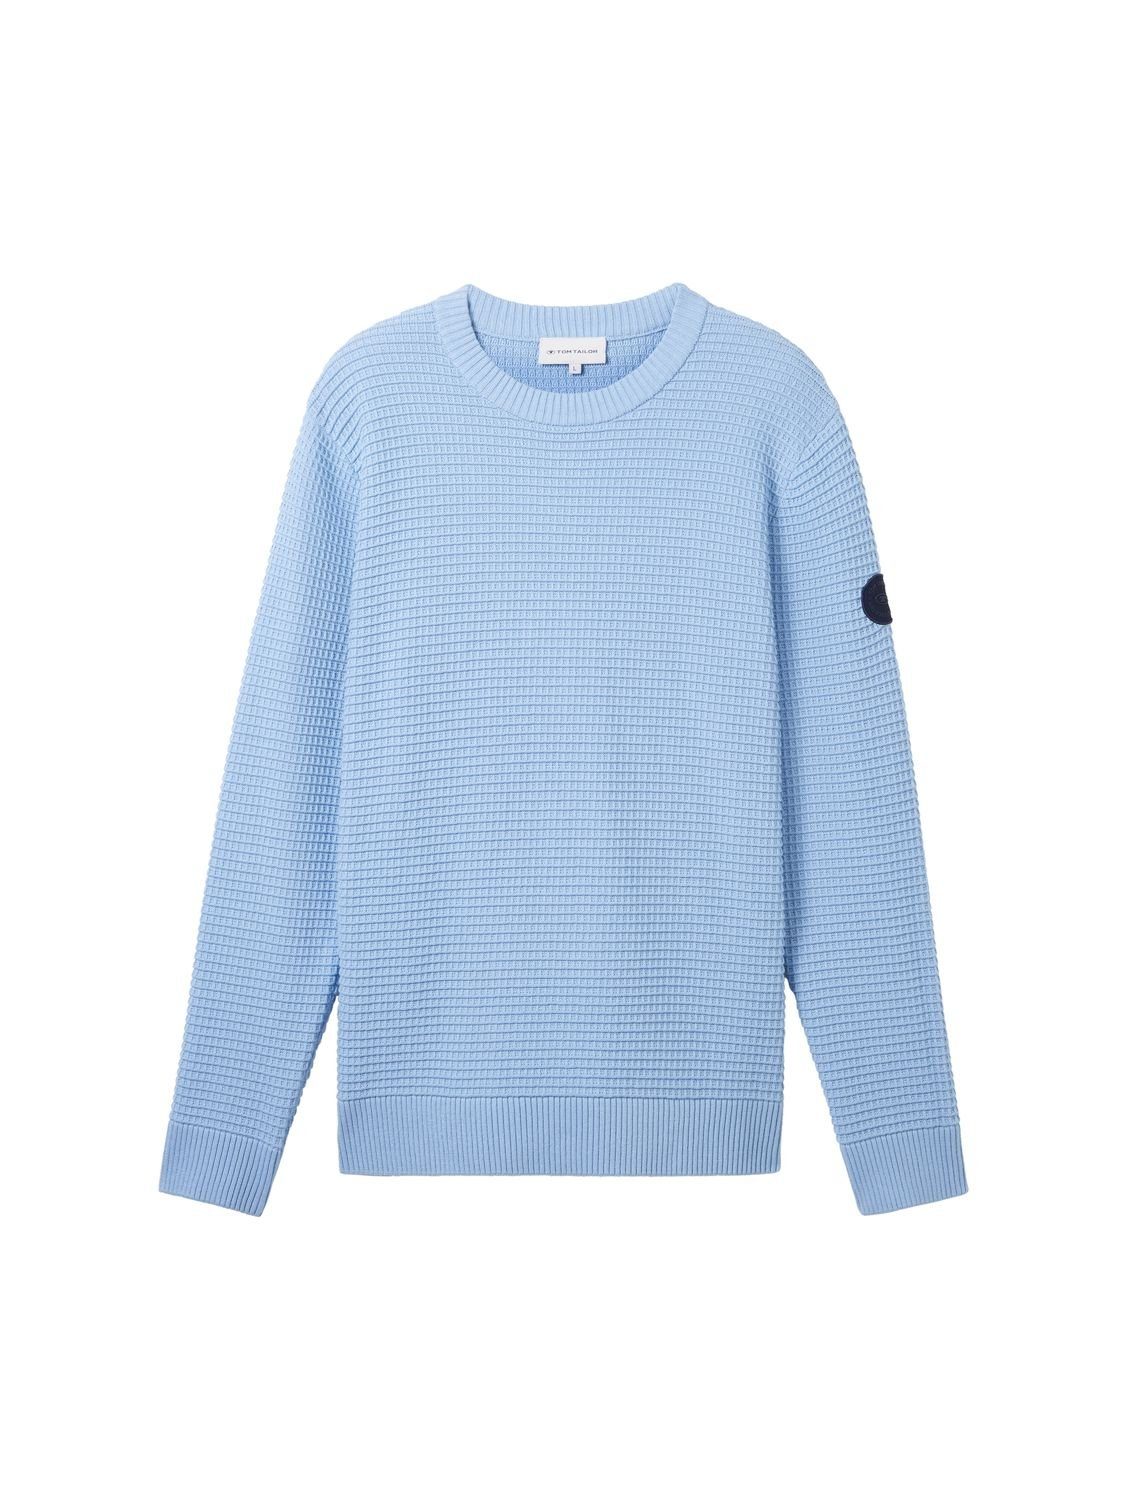 CREWNECK Strickpullover Blue Baumwolle Middle Washed Out KNIT aus 32245 TOM TAILOR STRUCTURED